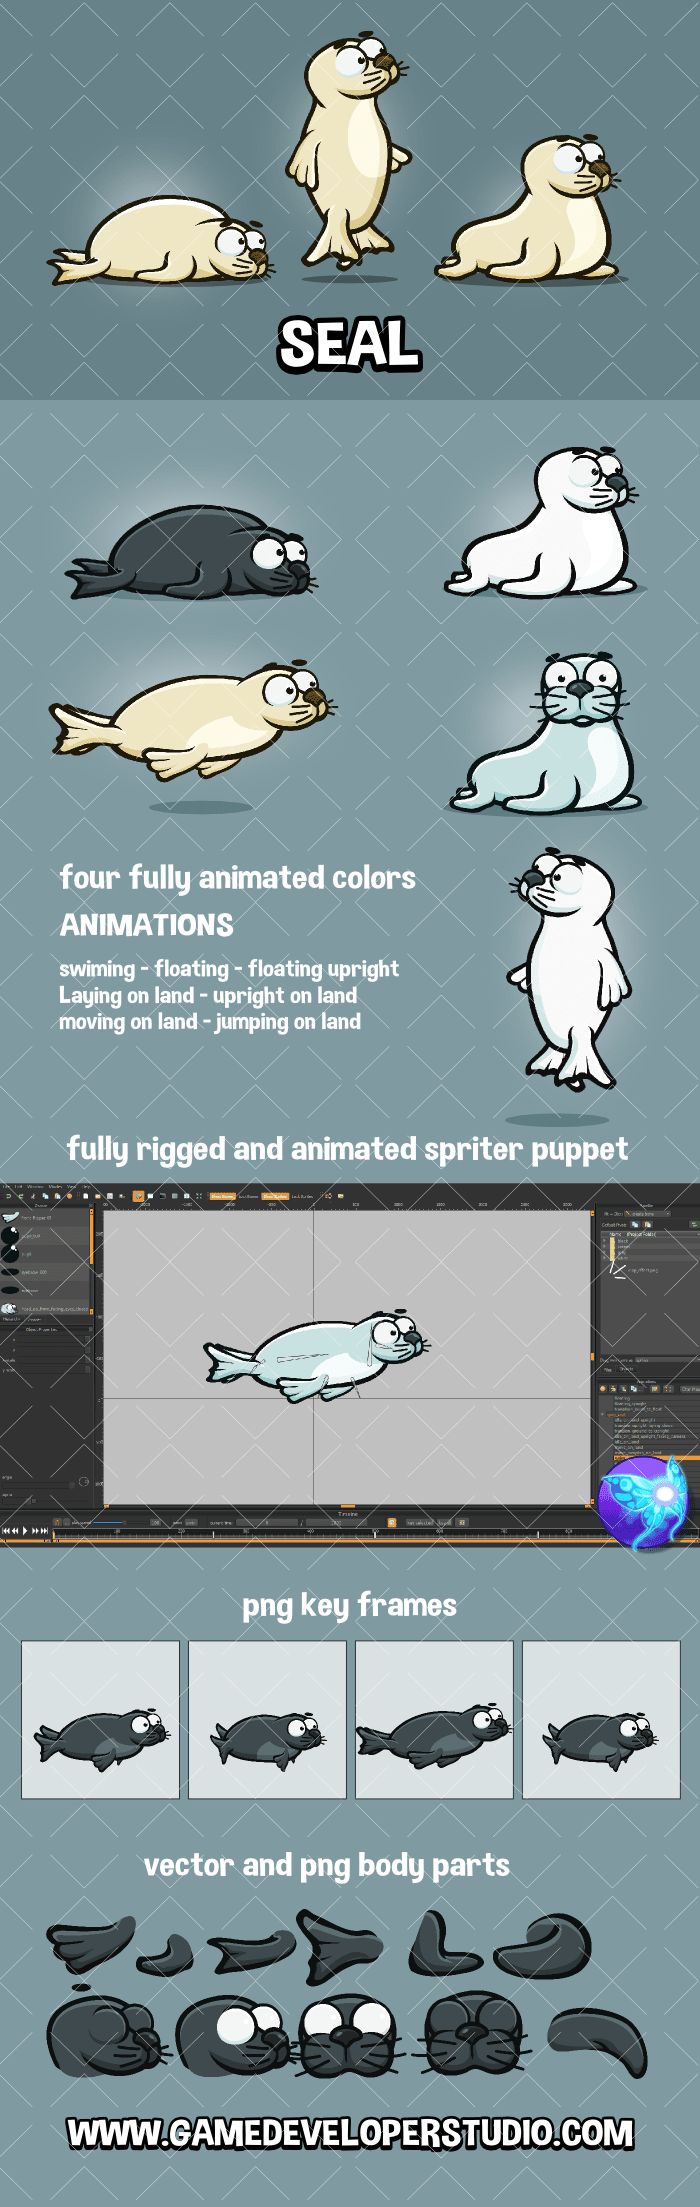 Animated seal game sprite